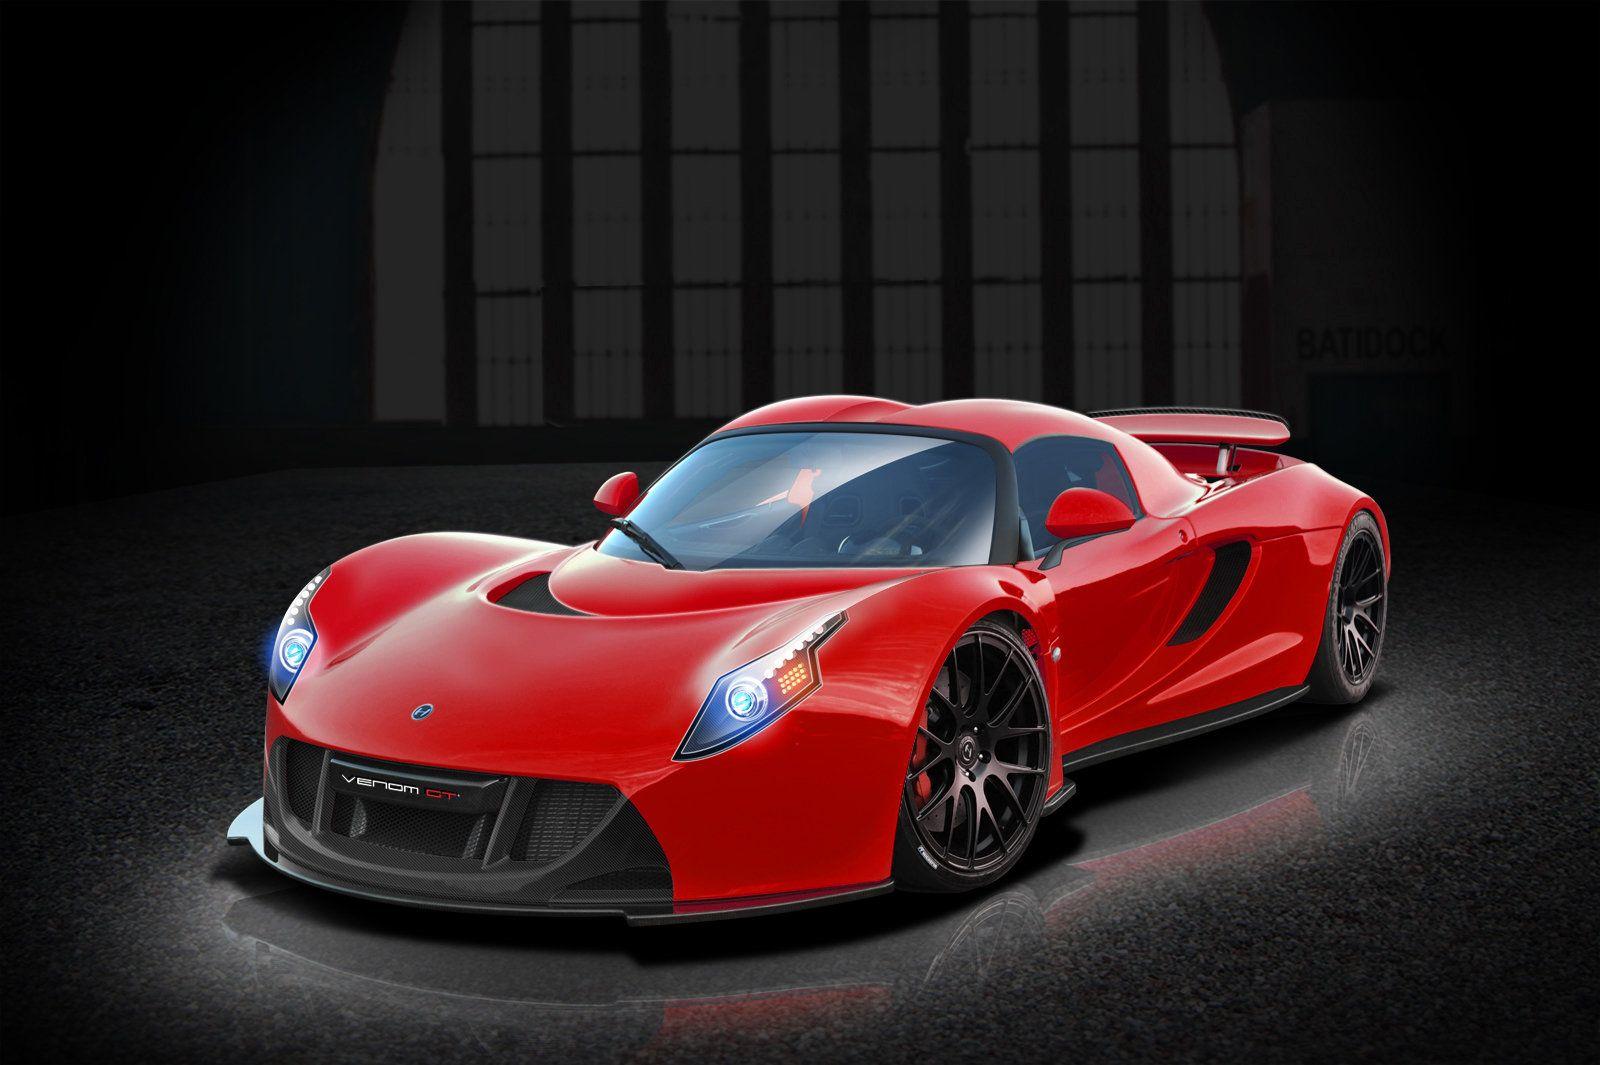 Hennessy Car Logo - Hennessey Venom Reviews, Specs, Prices, Photos And Videos | Top Speed